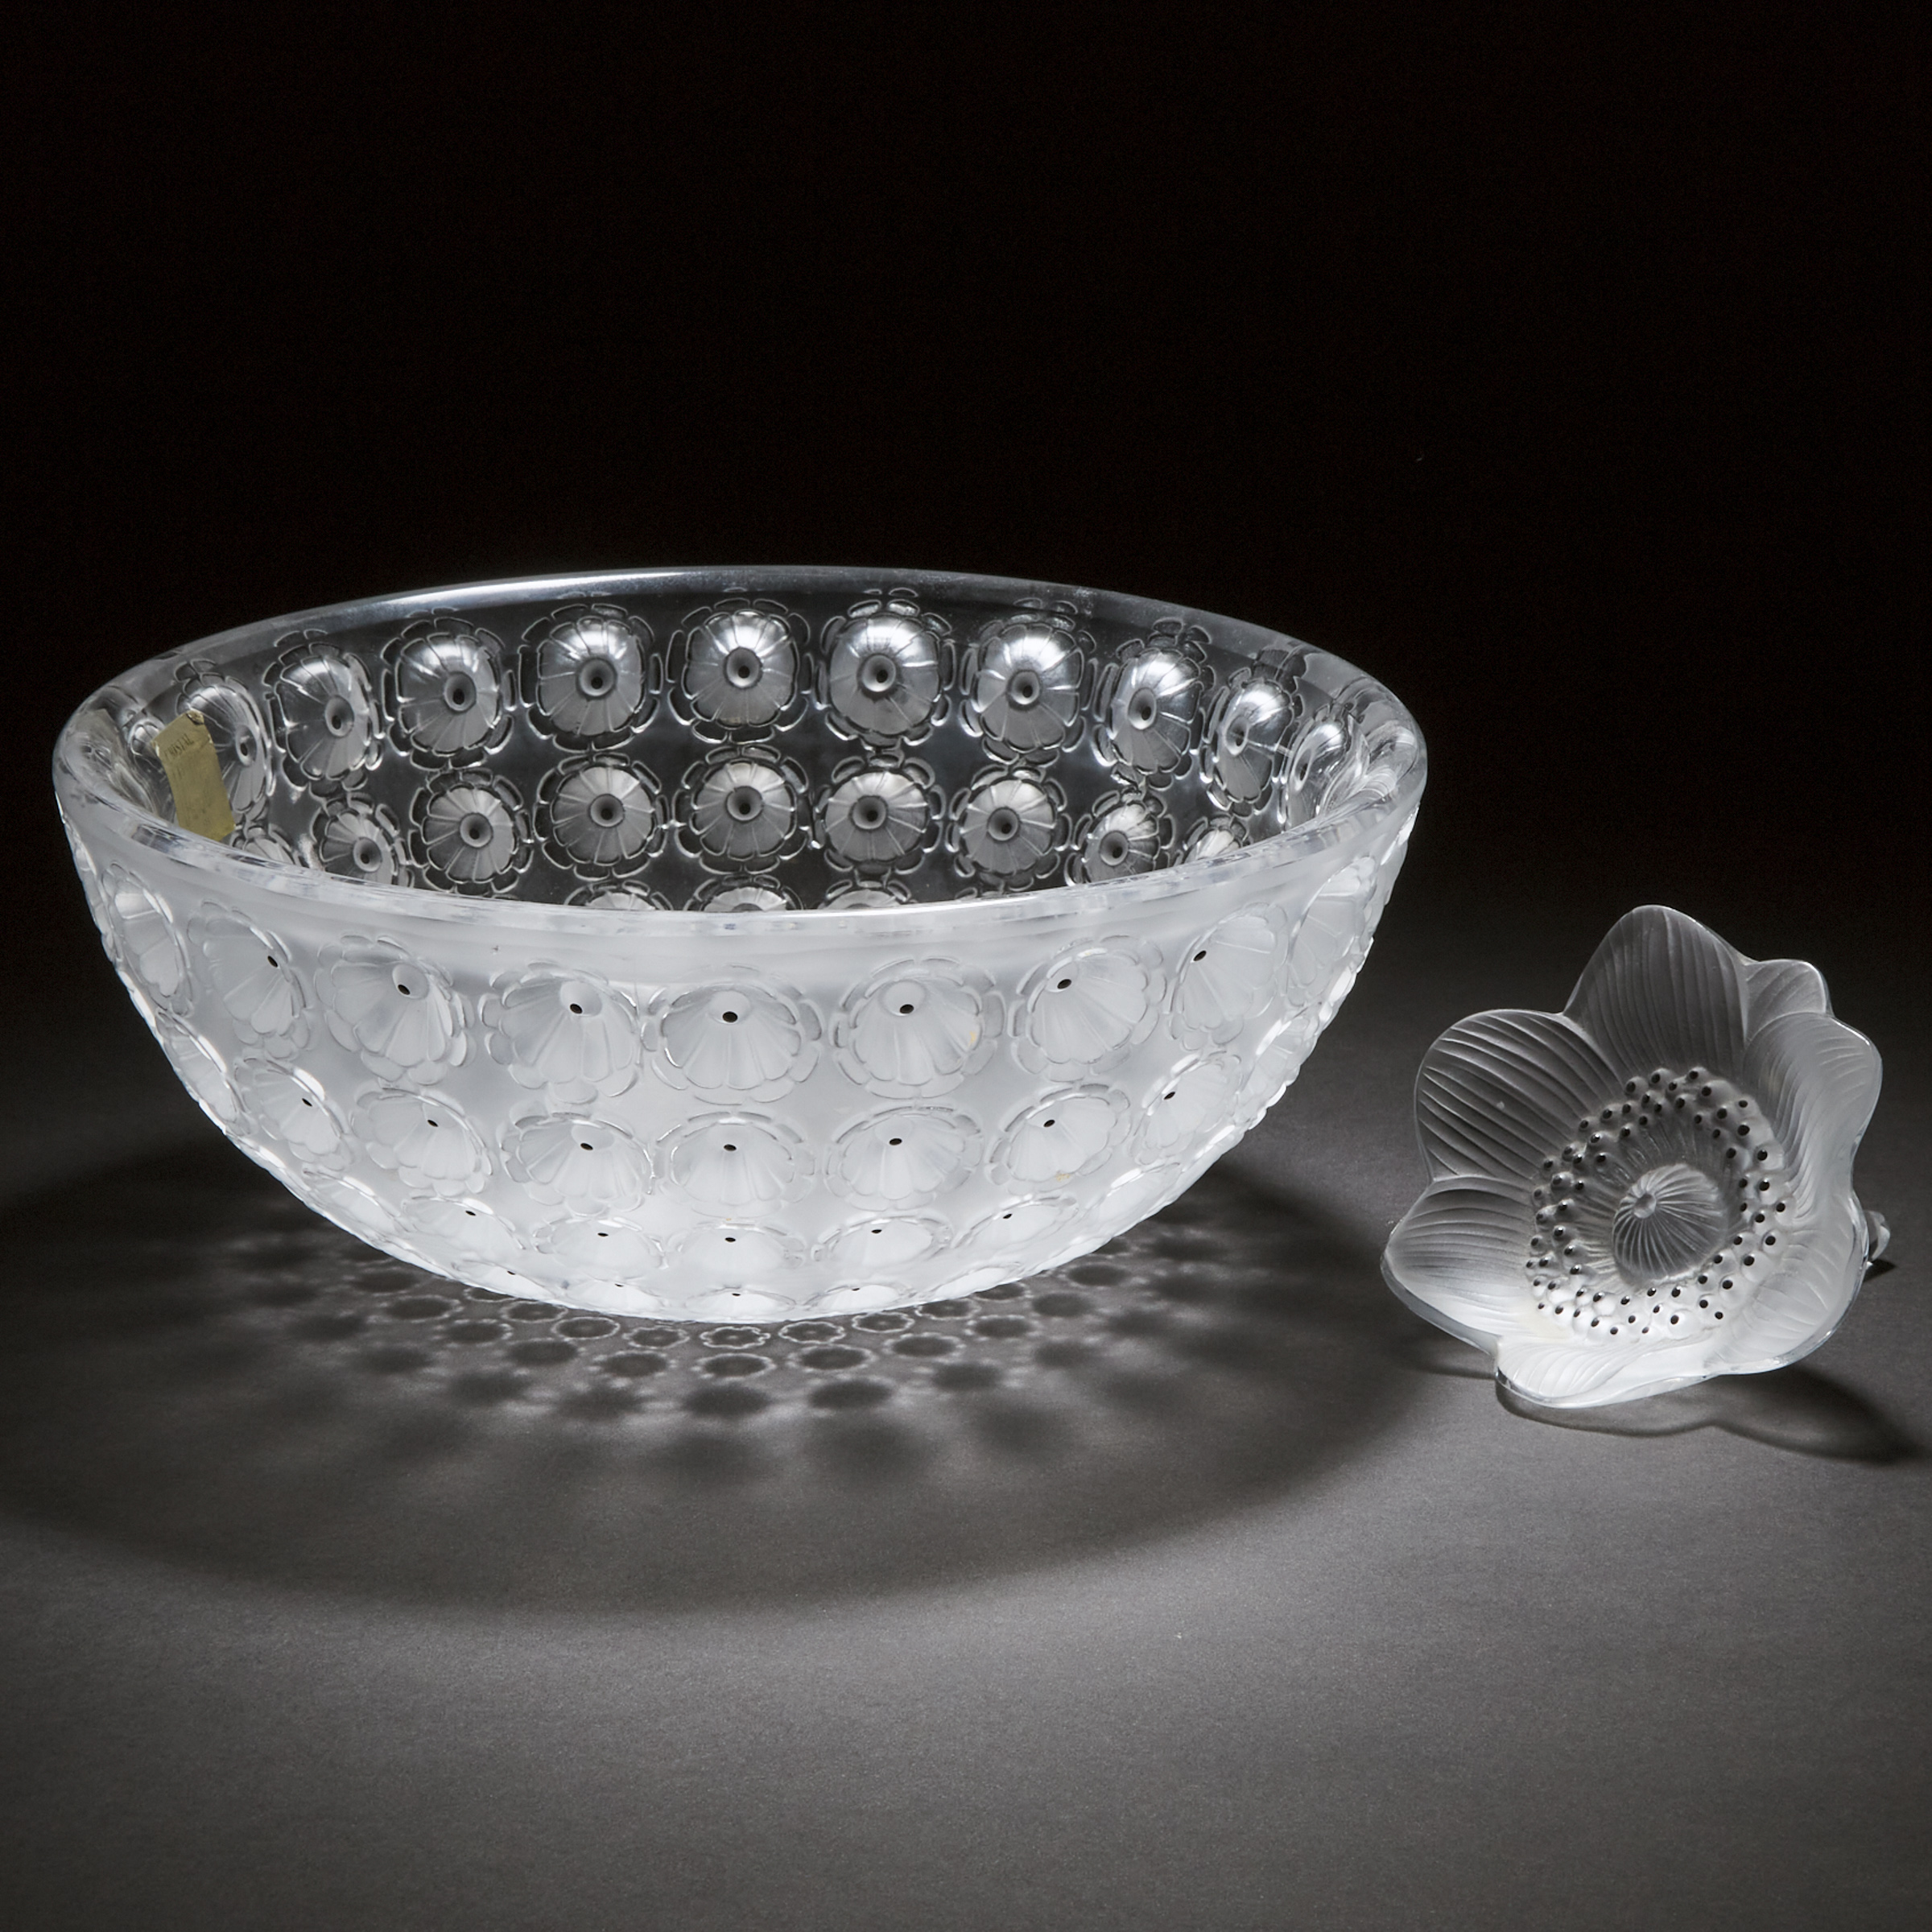 'Nemours', Lalique Frosted and Enameled Glass Bowl and Anemone Paperweight, post-1945